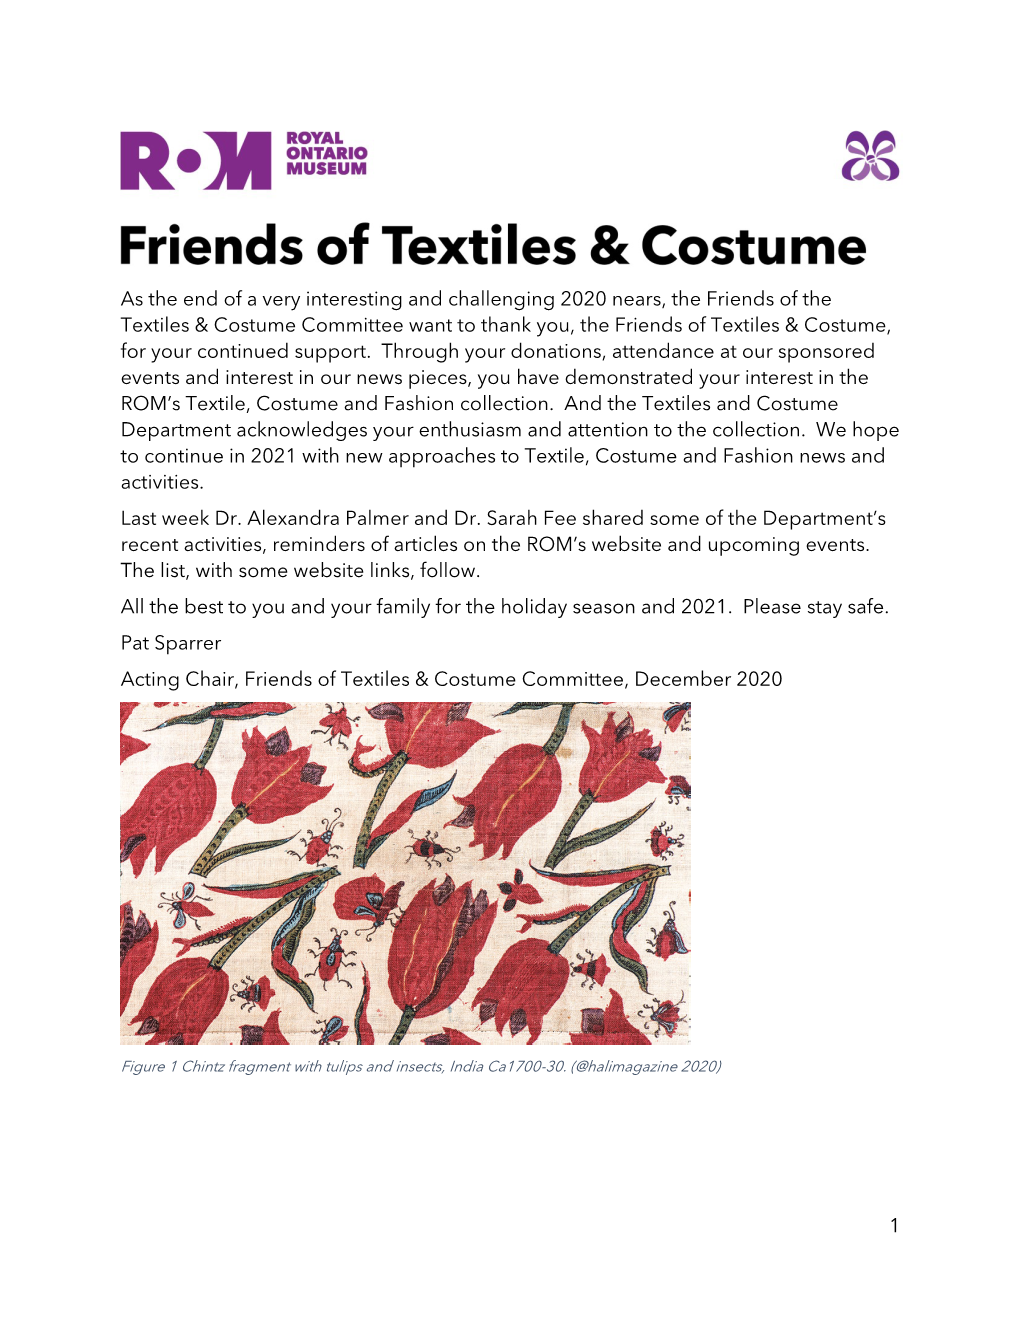 December 2020 Friends of Textiles and Costume Accessible Newsletter